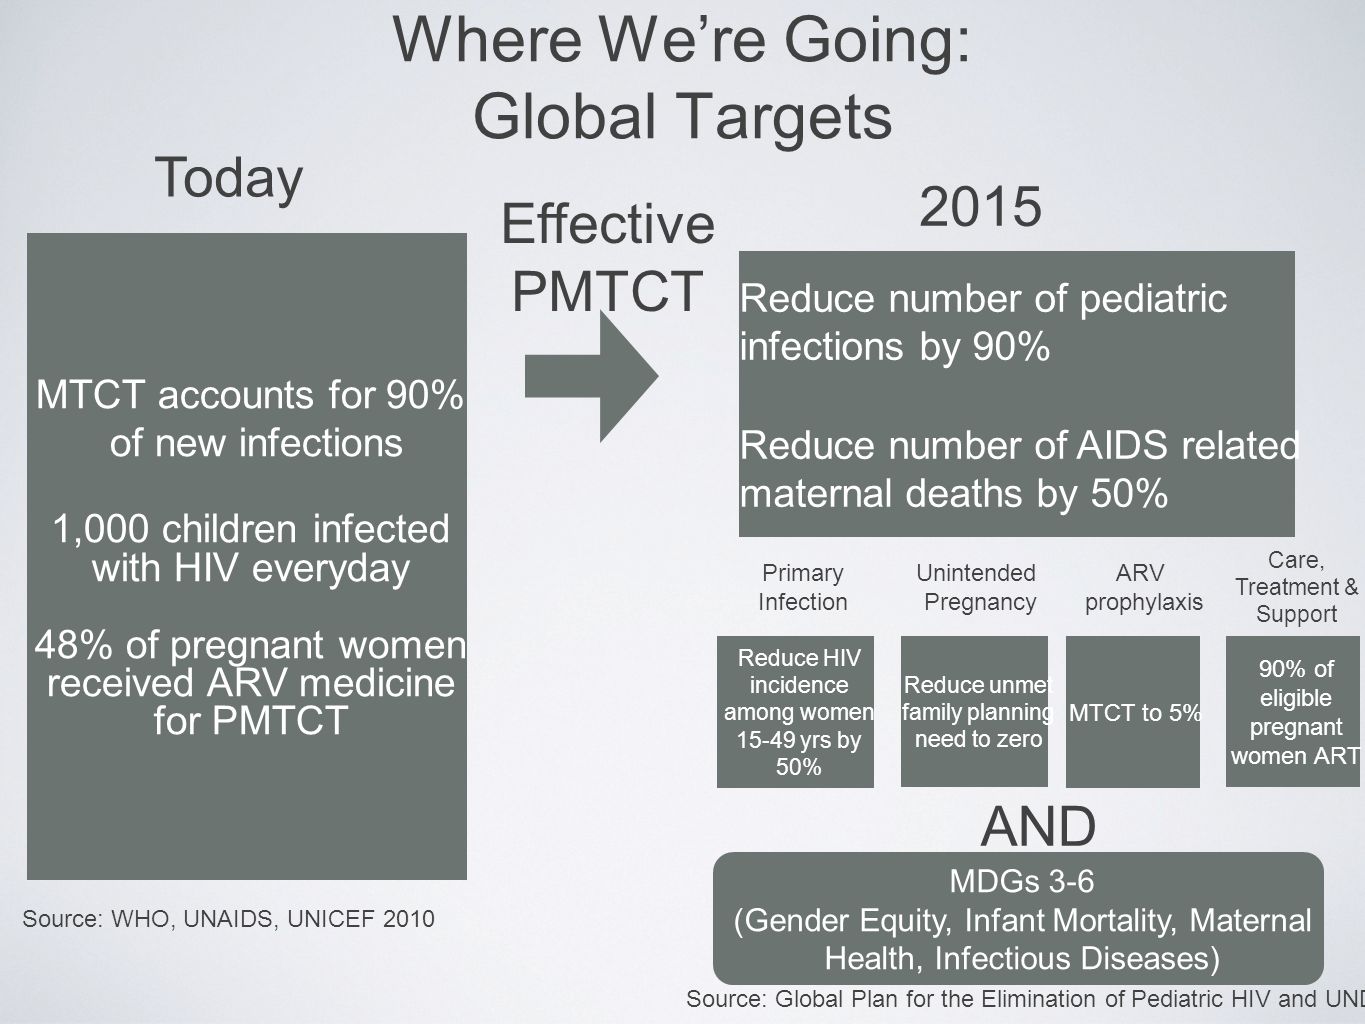 Where We’re Going: Global Targets MTCT accounts for 90% of new infections 1,000 children infected with HIV everyday 48% of pregnant women received ARV medicine for PMTCT Reduce number of pediatric infections by 90% Reduce number of AIDS related maternal deaths by 50% Today 2015 Effective PMTCT Source: Global Plan for the Elimination of Pediatric HIV and UNDP Reduce HIV incidence among women yrs by 50% Reduce unmet family planning need to zero MTCT to 5% 90% of eligible pregnant women ART Primary Infection Unintended Pregnancy ARV prophylaxis Care, Treatment & Support Source: WHO, UNAIDS, UNICEF 2010 AND MDGs 3-6 (Gender Equity, Infant Mortality, Maternal Health, Infectious Diseases)